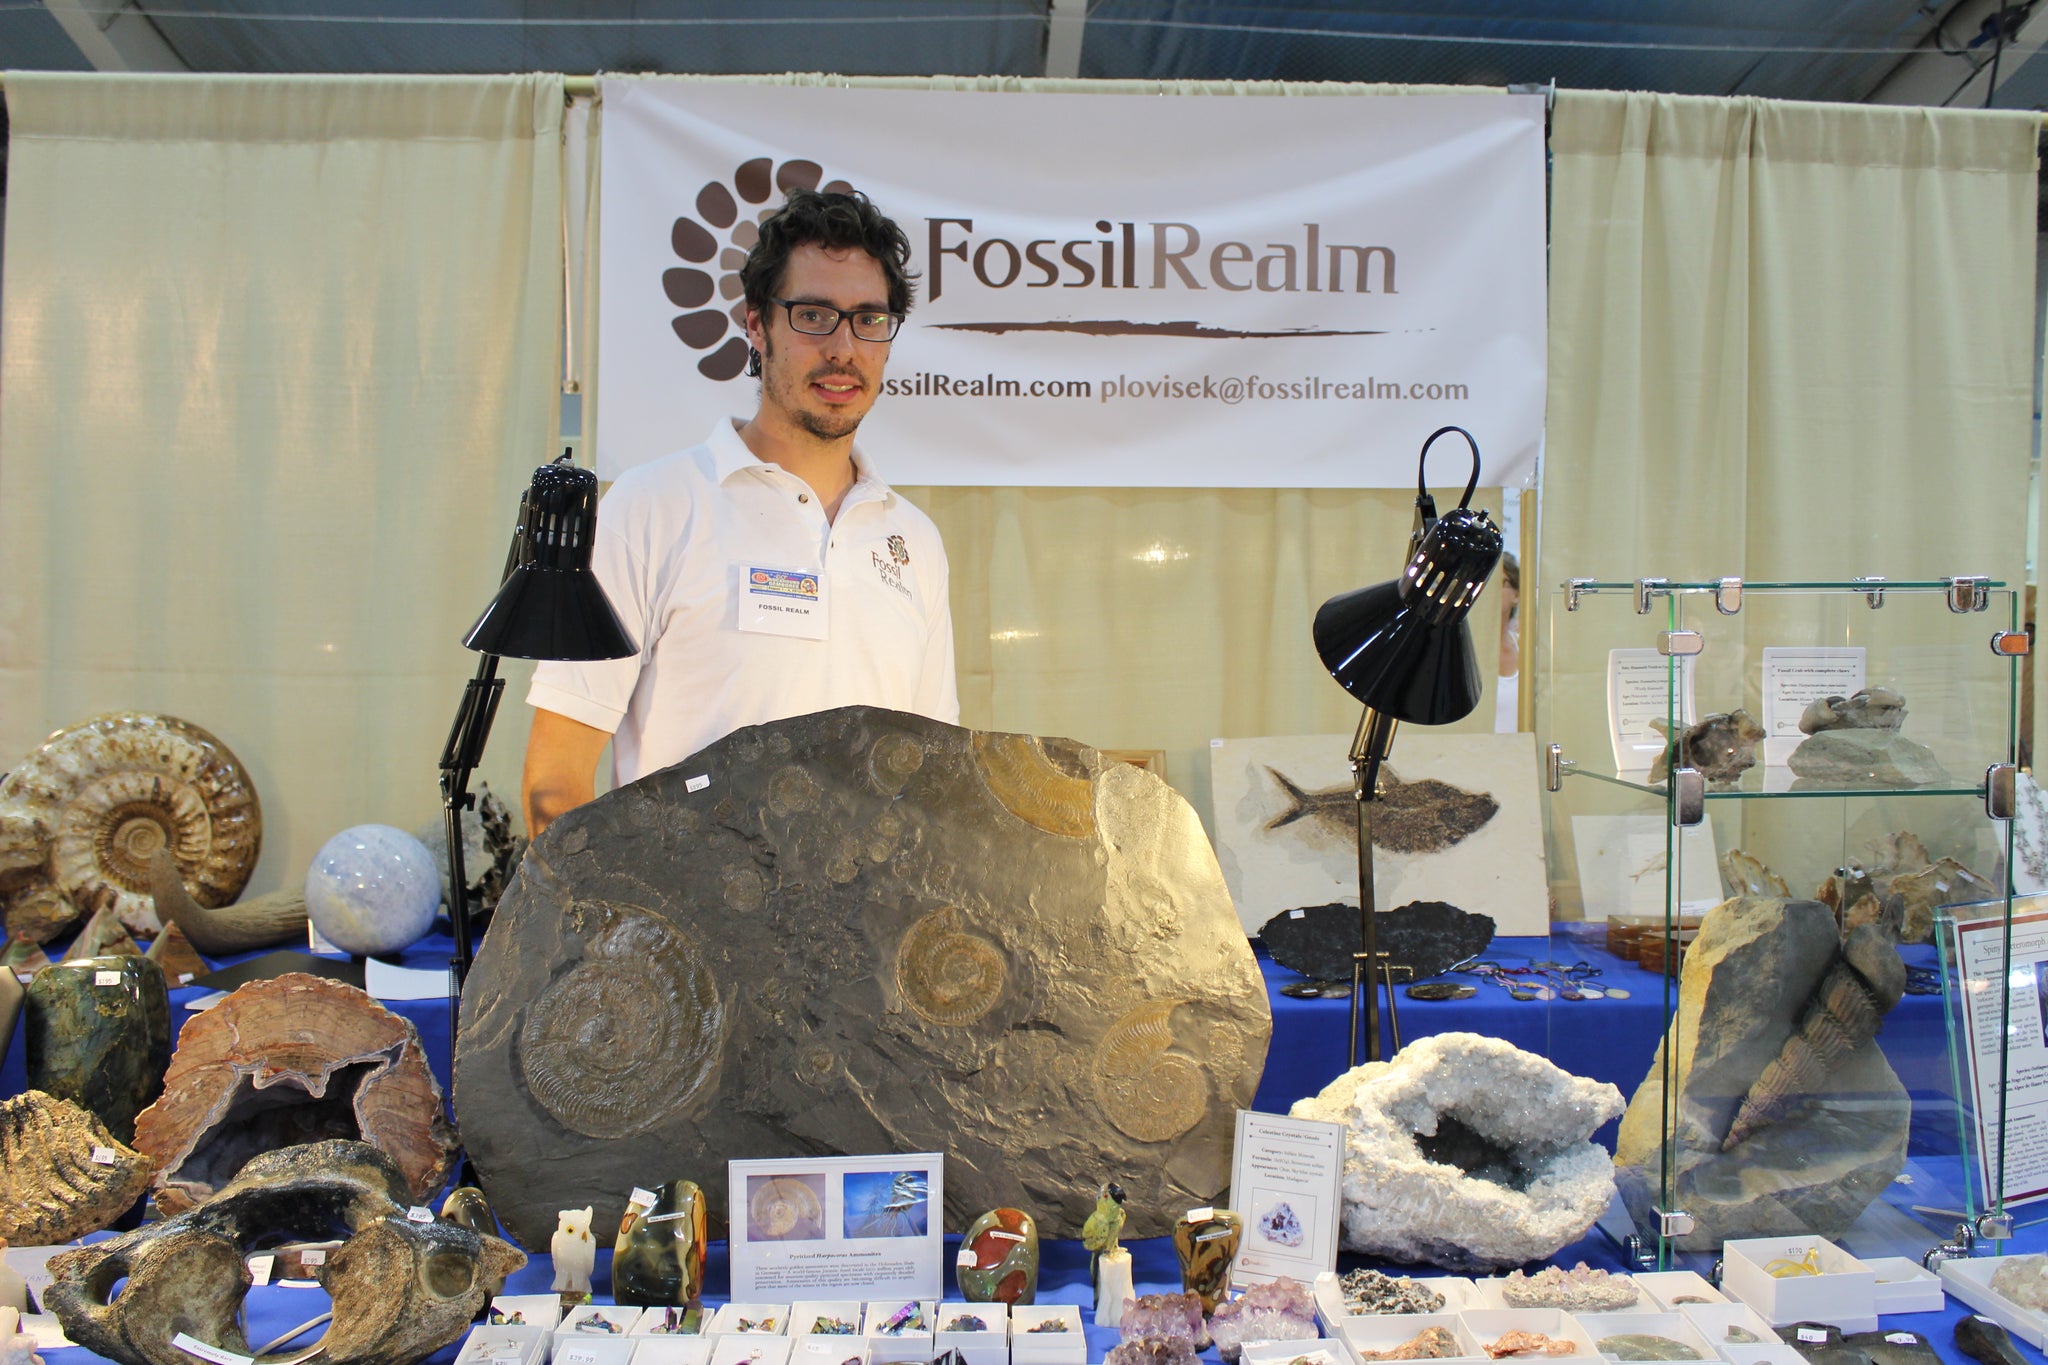 Peter Lovisek in Bancroft Ontario, managing the Fossil Realm booth